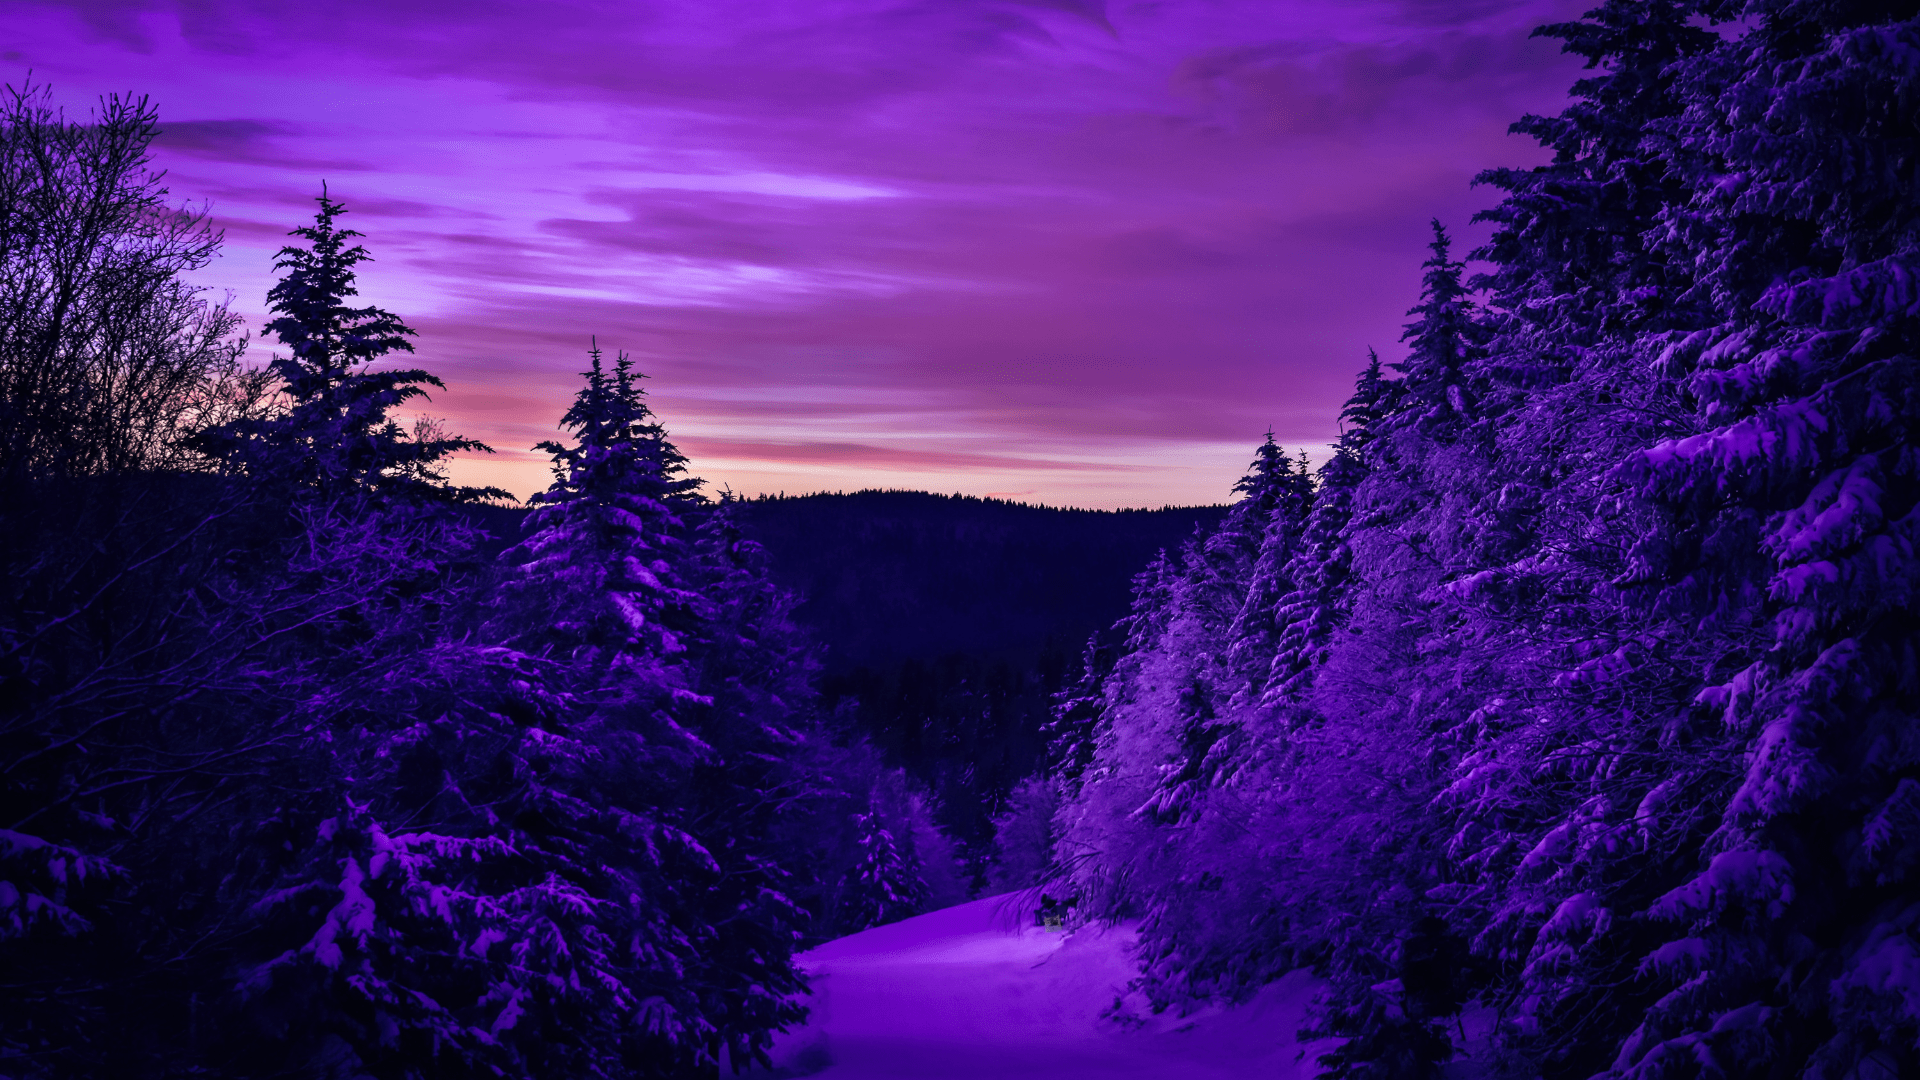 A purple tinted image of a snowy forest at night. - Purple, cute purple, violet